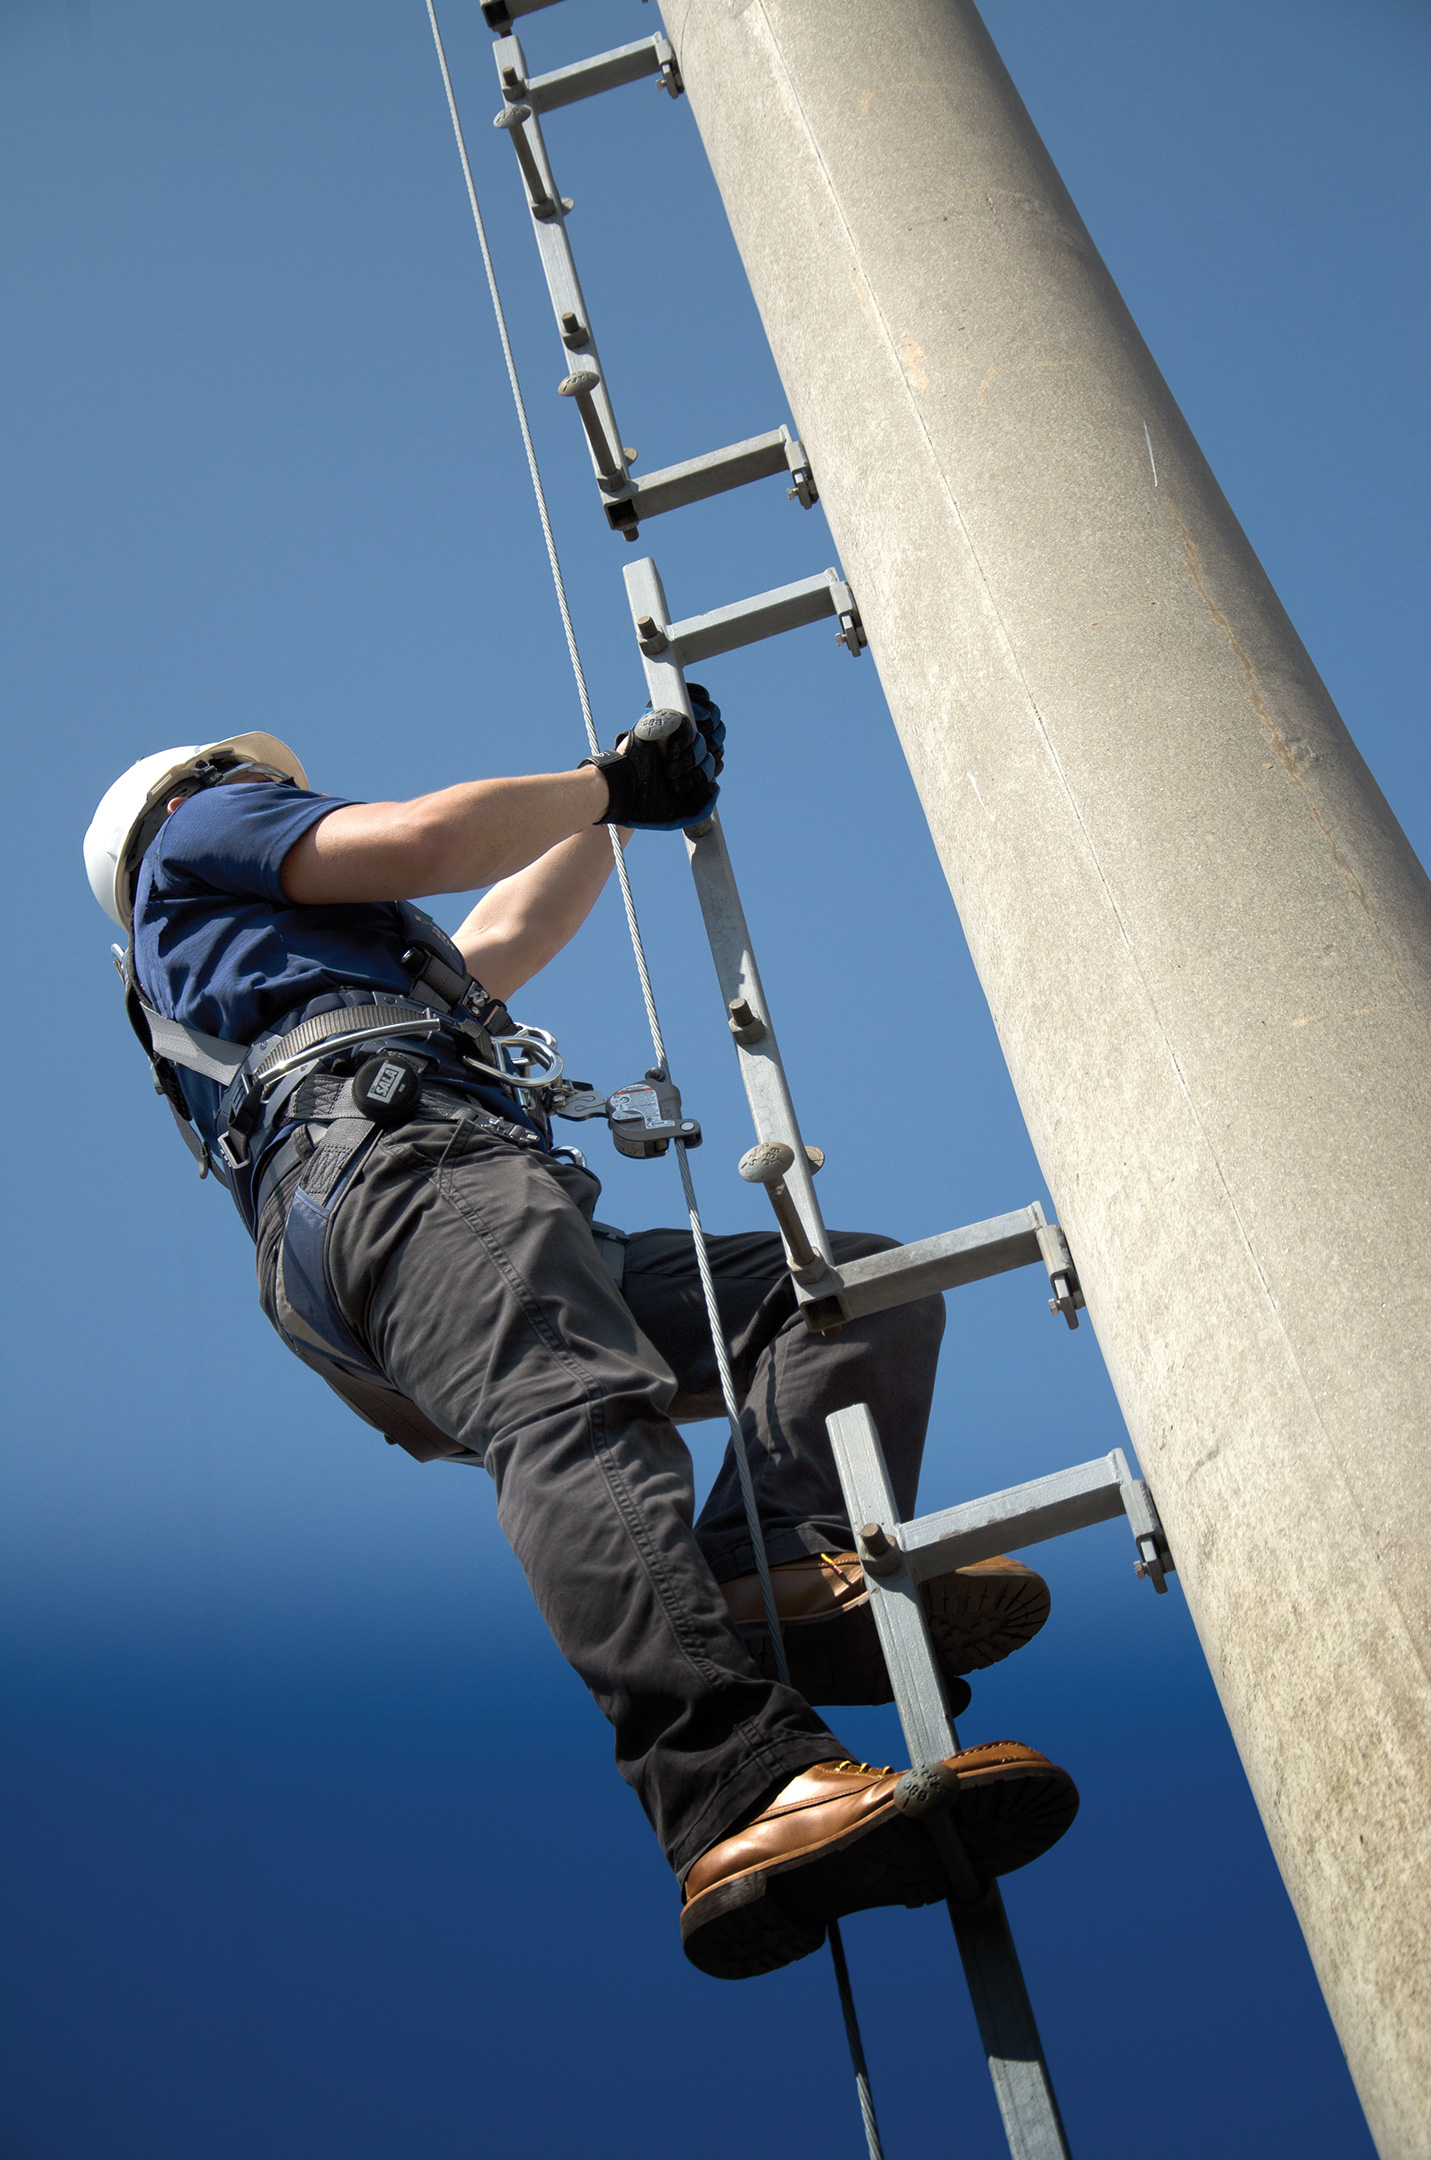 Vertical Lifeline Systems | Vertical Fall Arrest Systems
